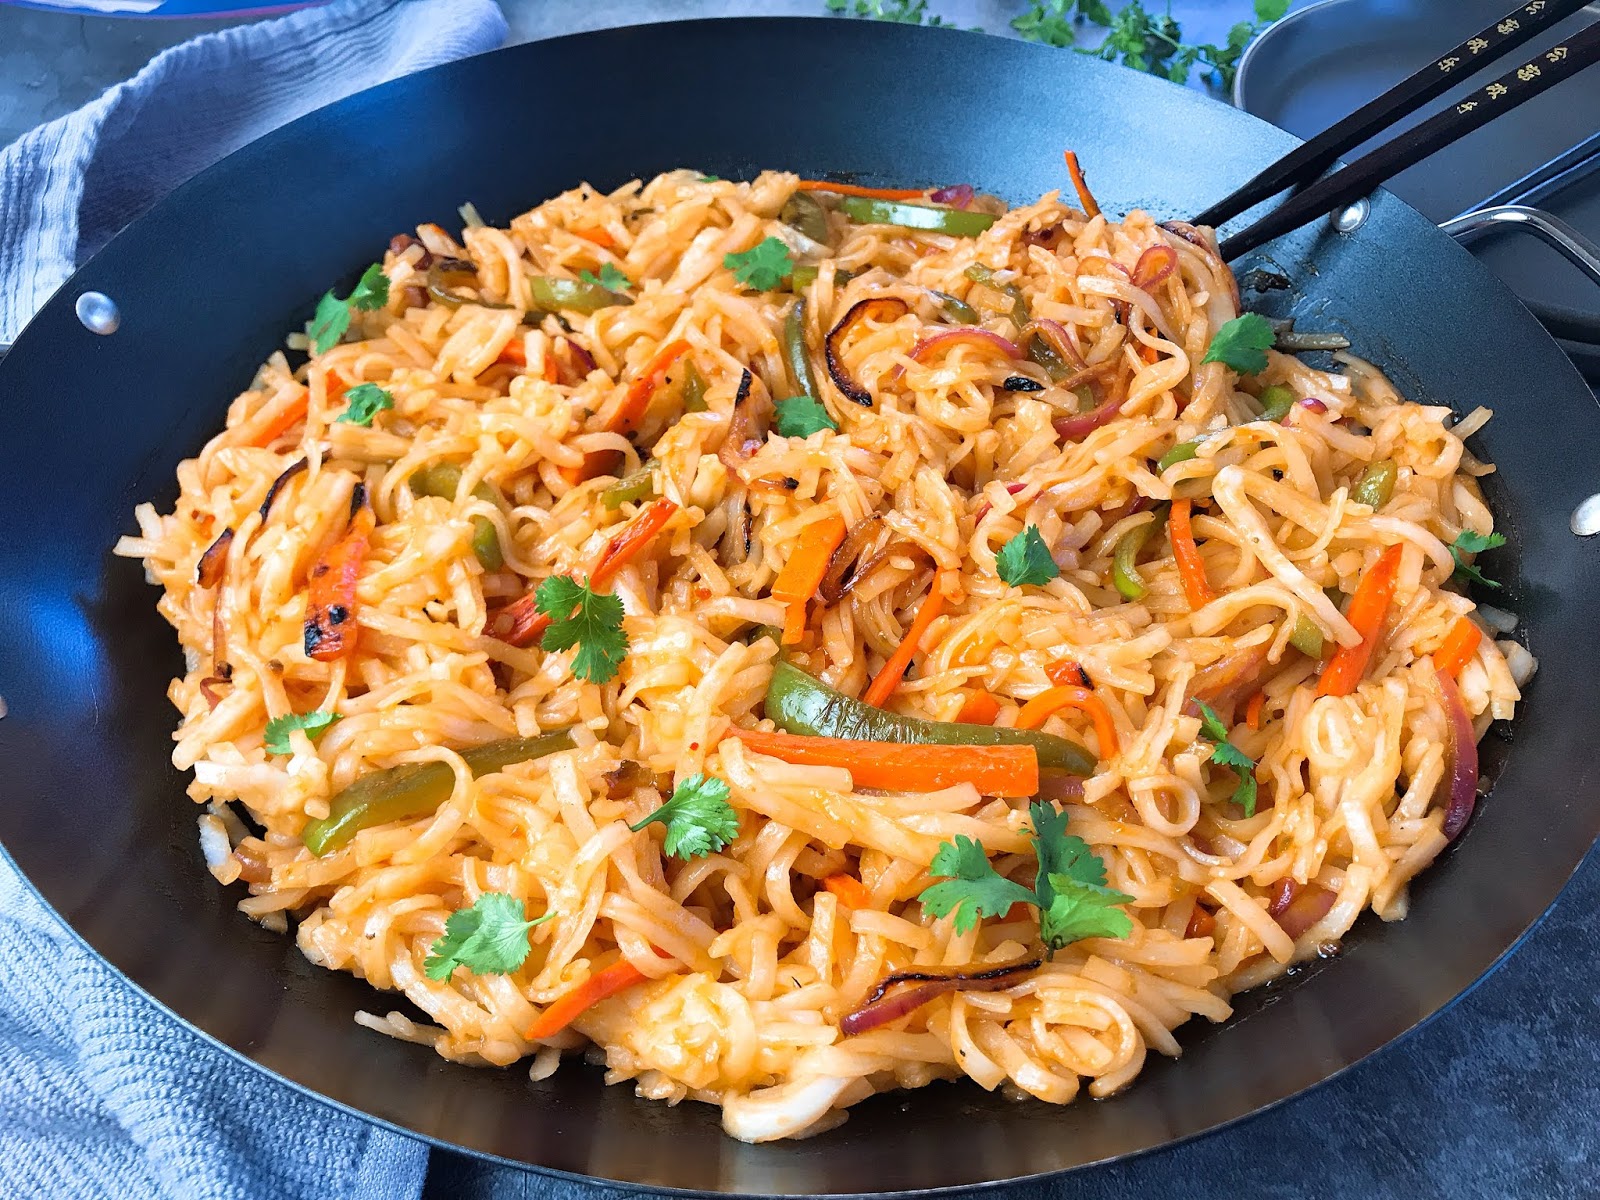 Sweet and Sour Noodles with Vegetables (Gluten-Free)